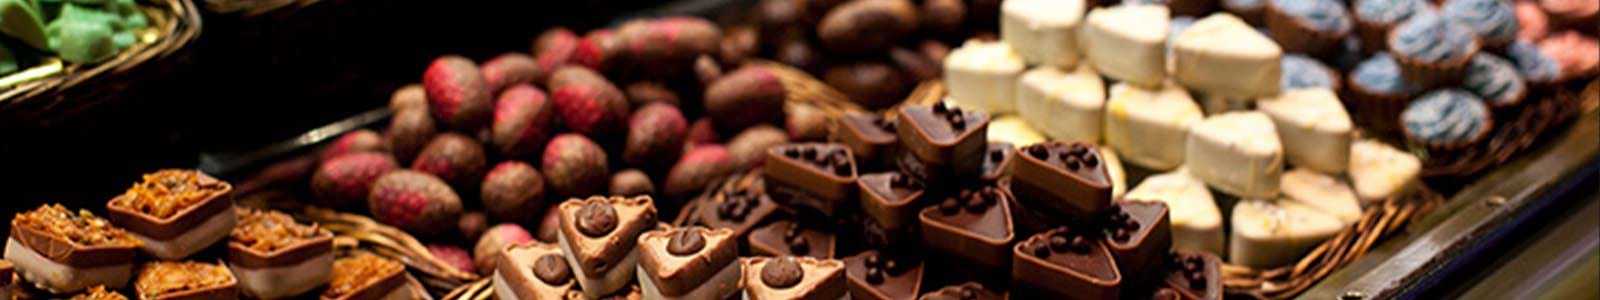 Chocolate Store - buy chocolate from the health food store in the USA - Alive Herbals